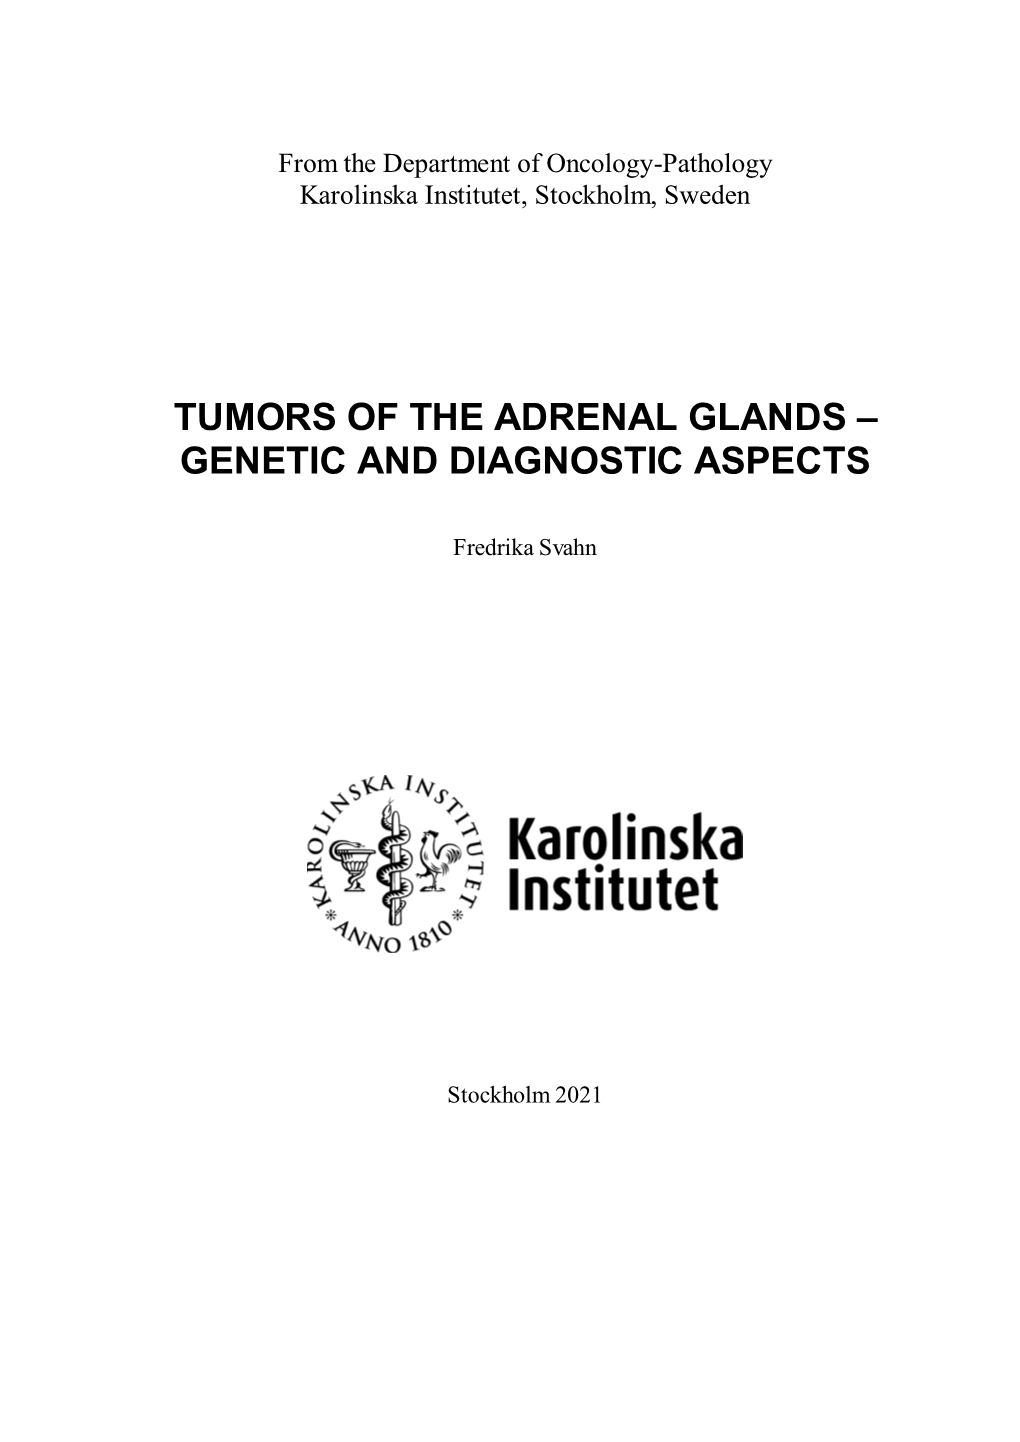 Tumors of the Adrenal Glands – Genetic and Diagnostic Aspects